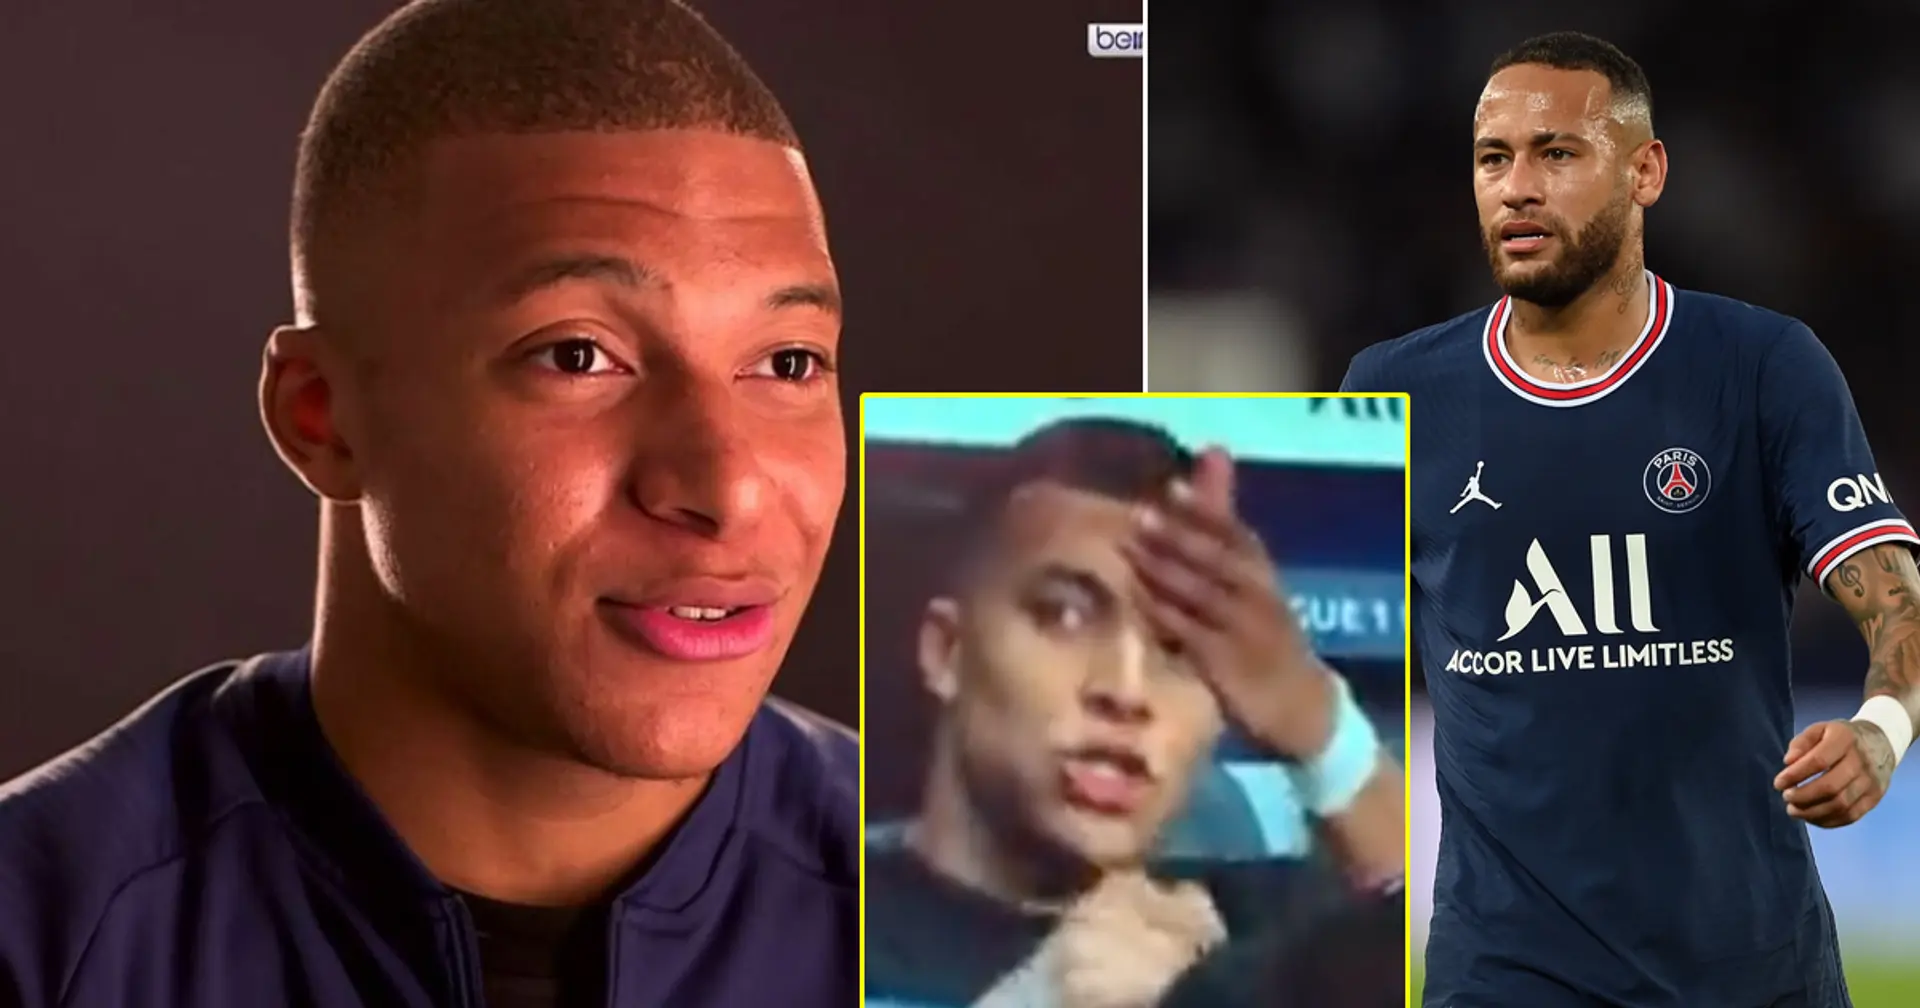 'Yes, I called Neymar ‘bum’: Mbappe explains why he insulted teammate on live TV 